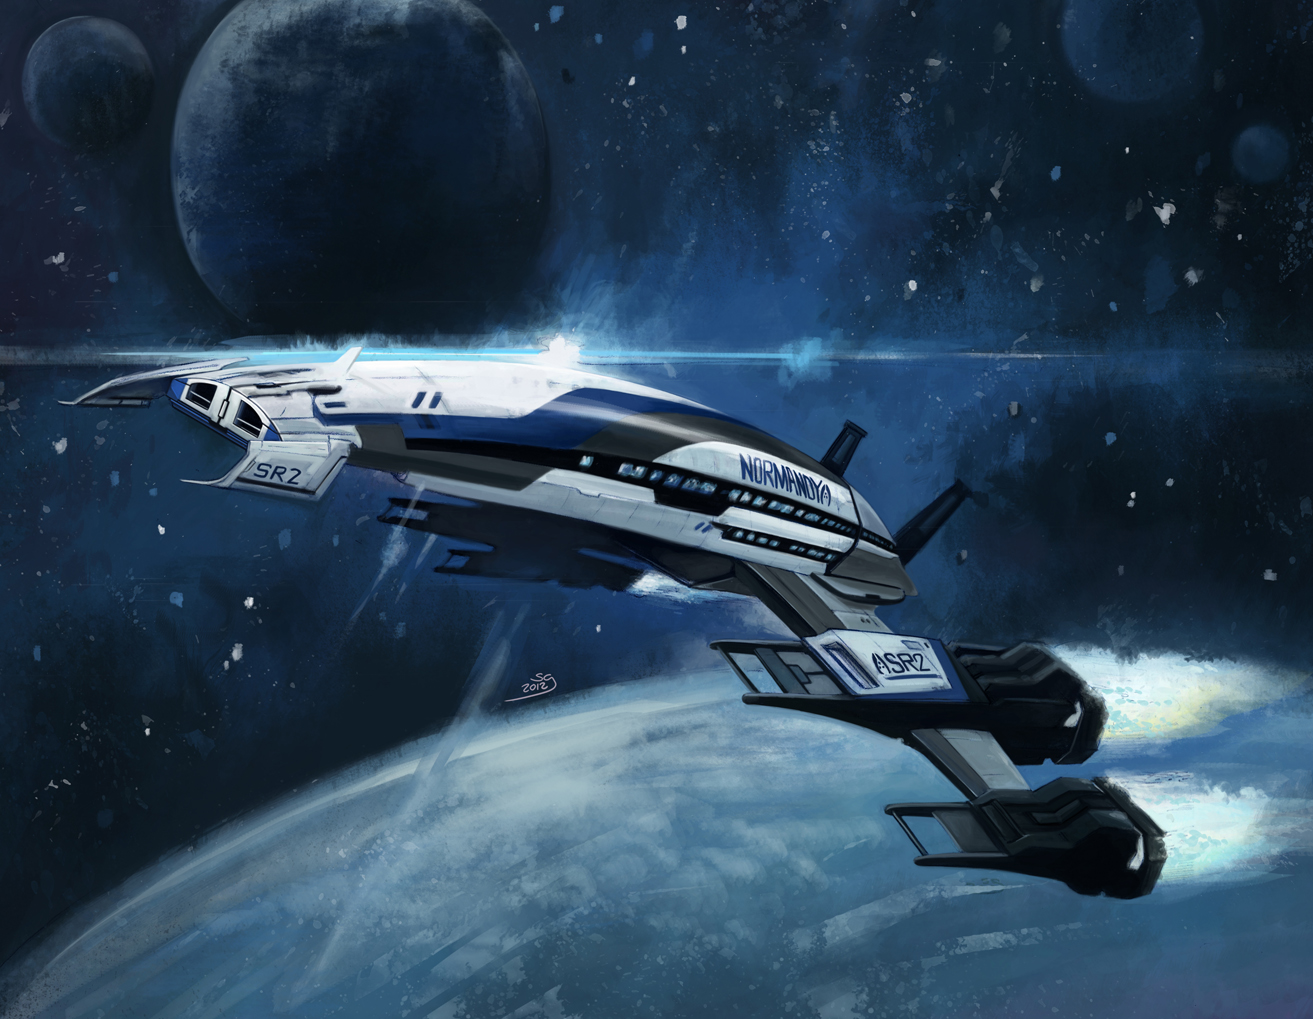 Mission Of The Normandy Sr2 From Mass Effect